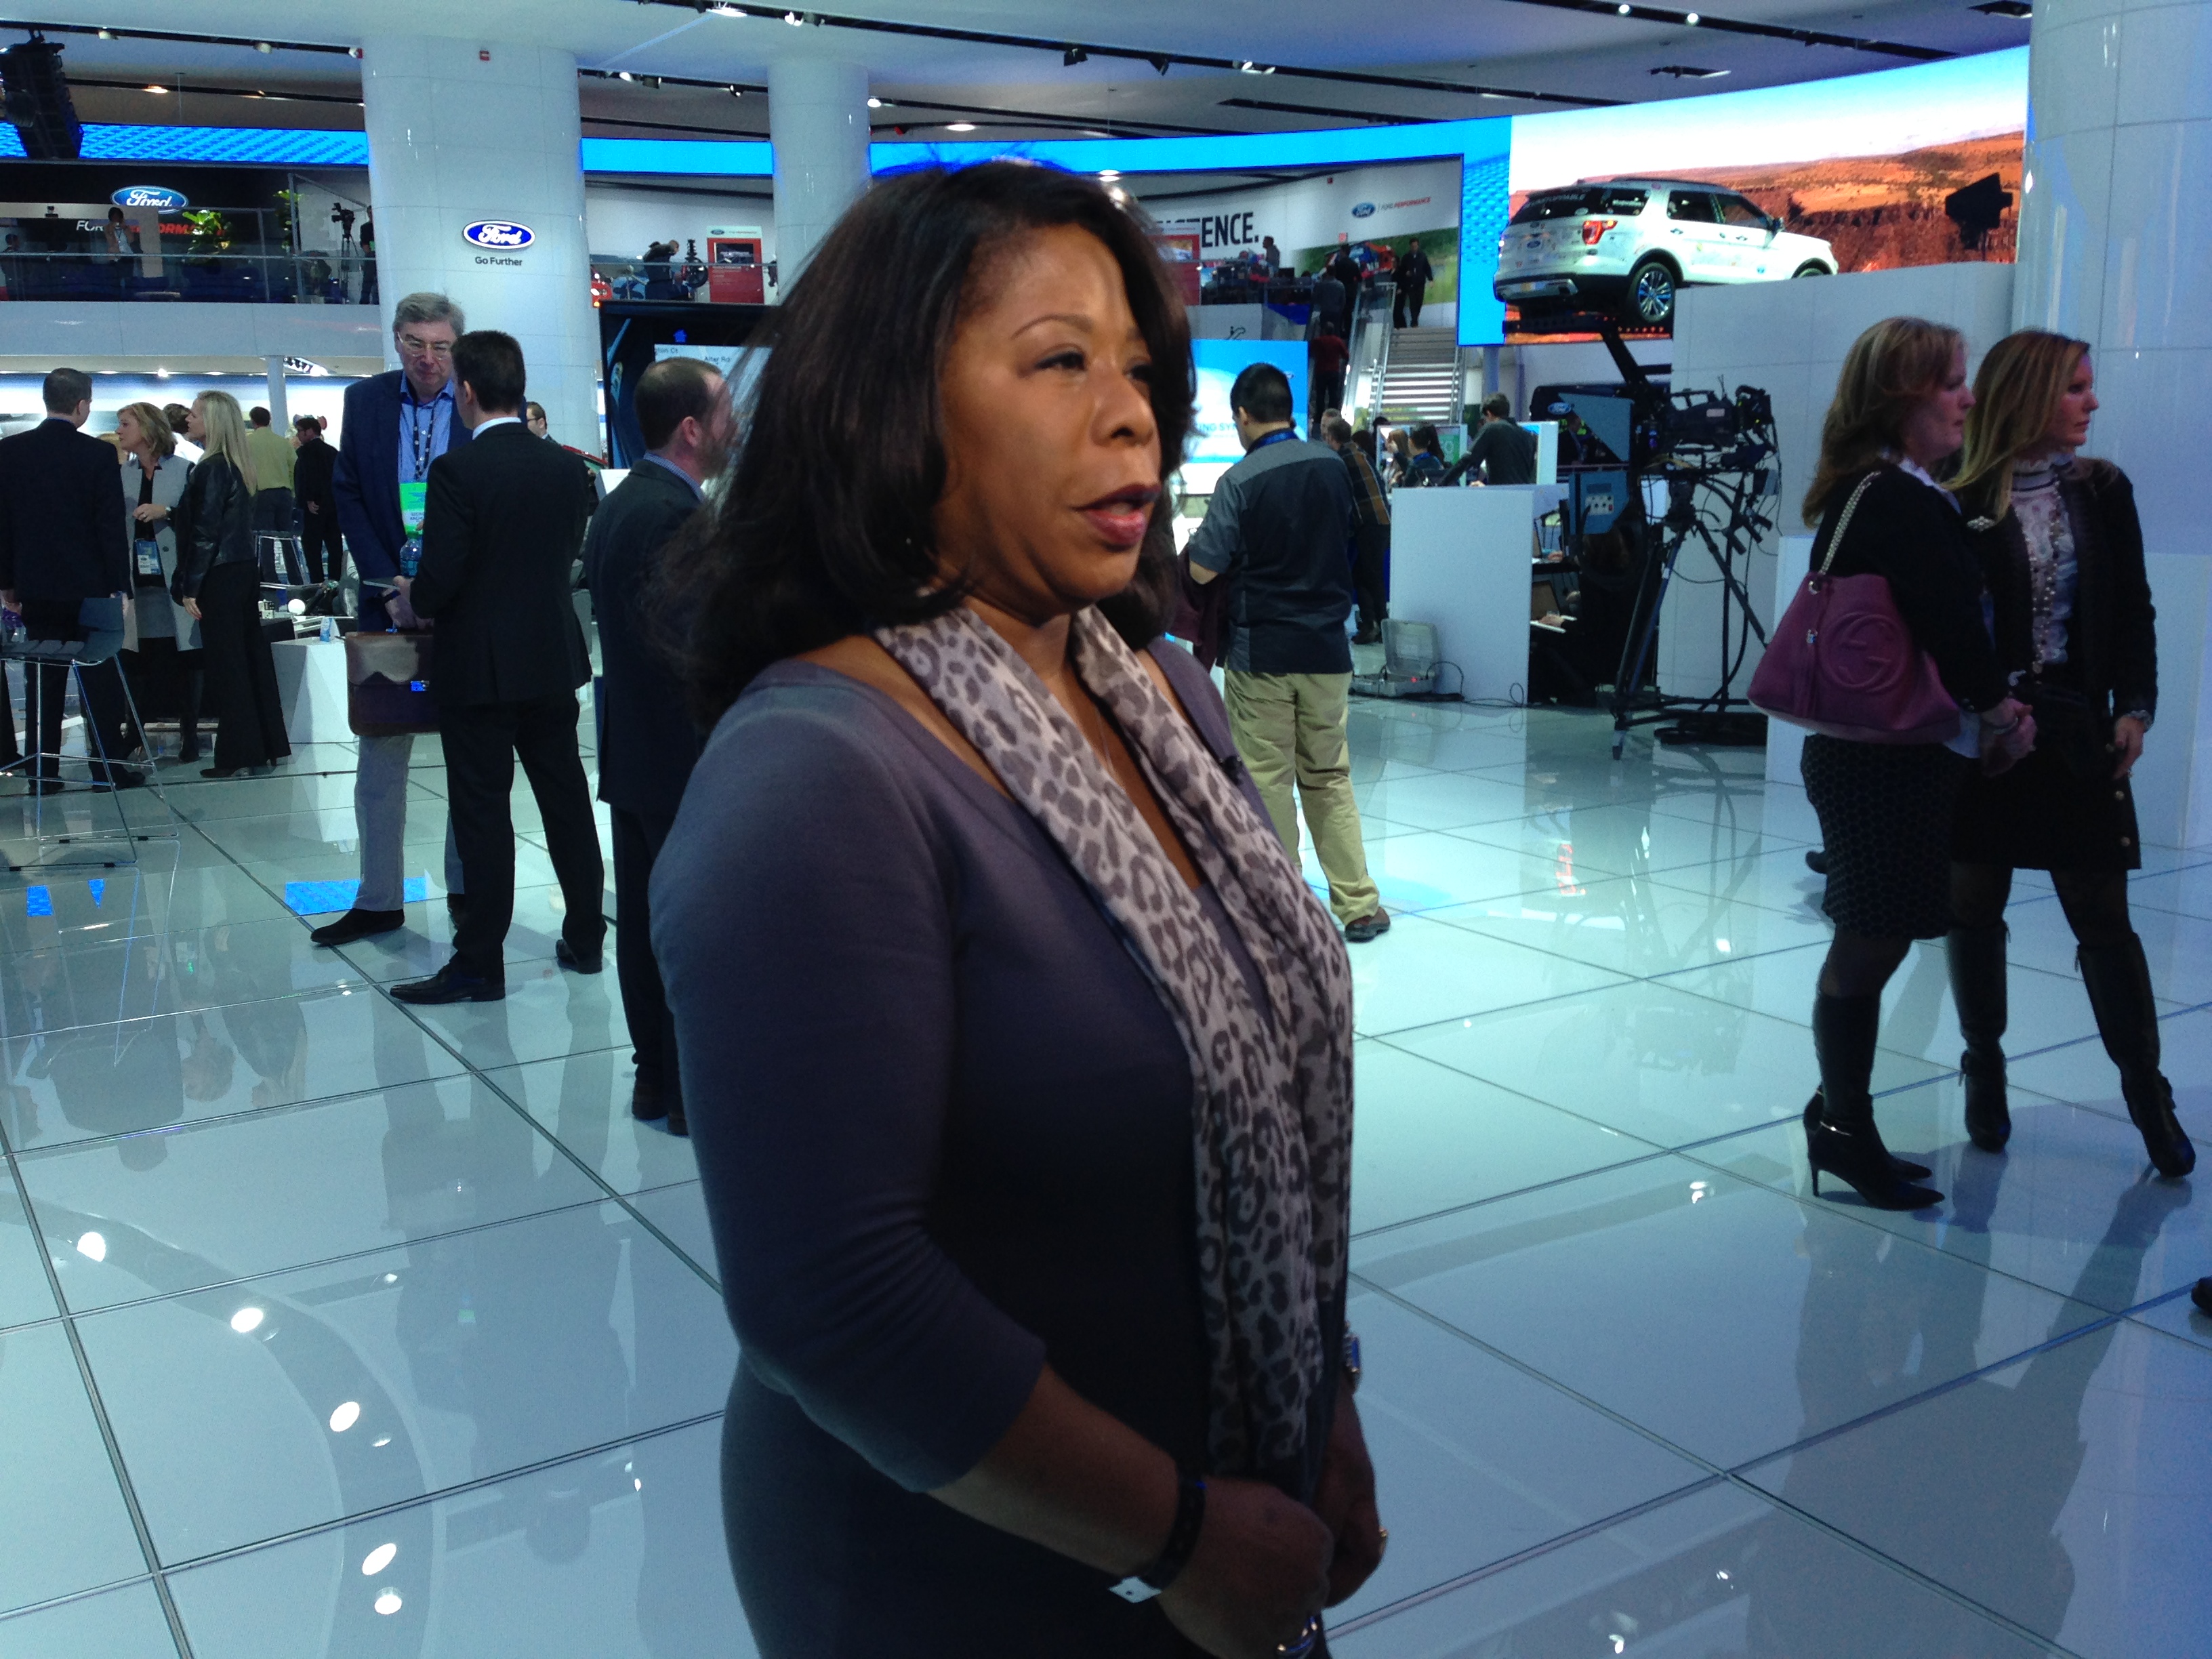 Cathy Nedd, COO of the Michigan Chronicle talks about impact of African American executives on auto industry and their "Driven" event held on Wednesday night where leaders were honored. (credit: CBS 62)